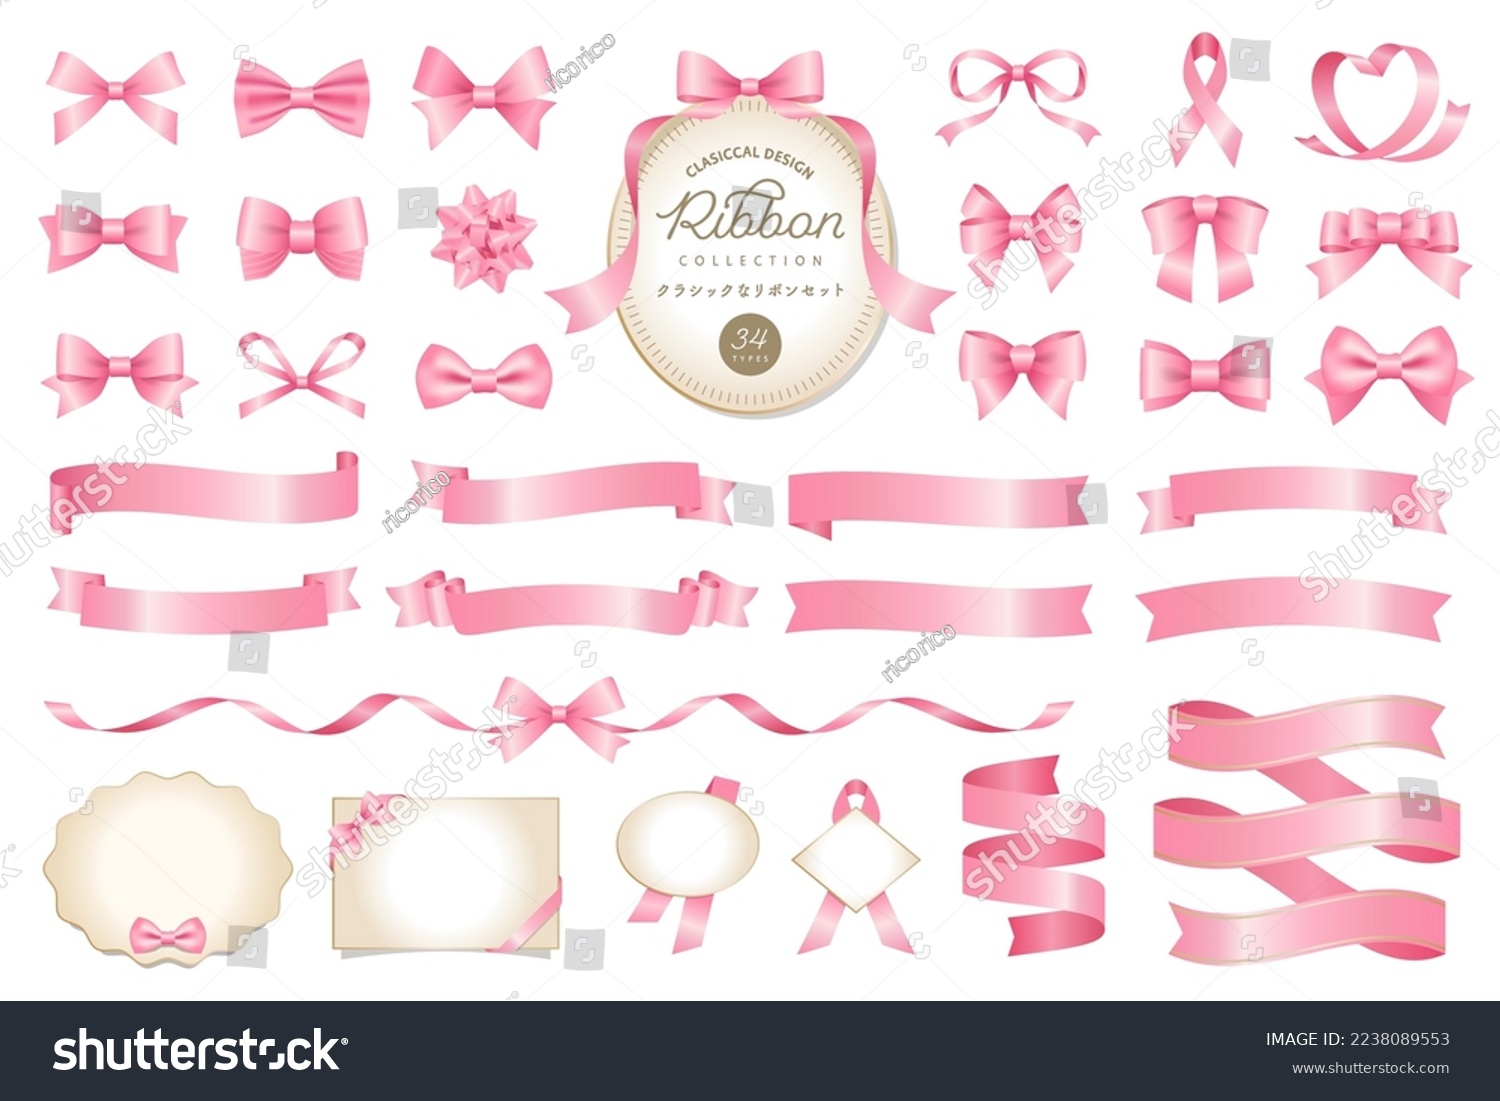 SVG of 34 sets of pink color ribbon illustrations. Classic and gorgeous ornaments and frames. Good for valentine's day and mother's day ( Text transition : 